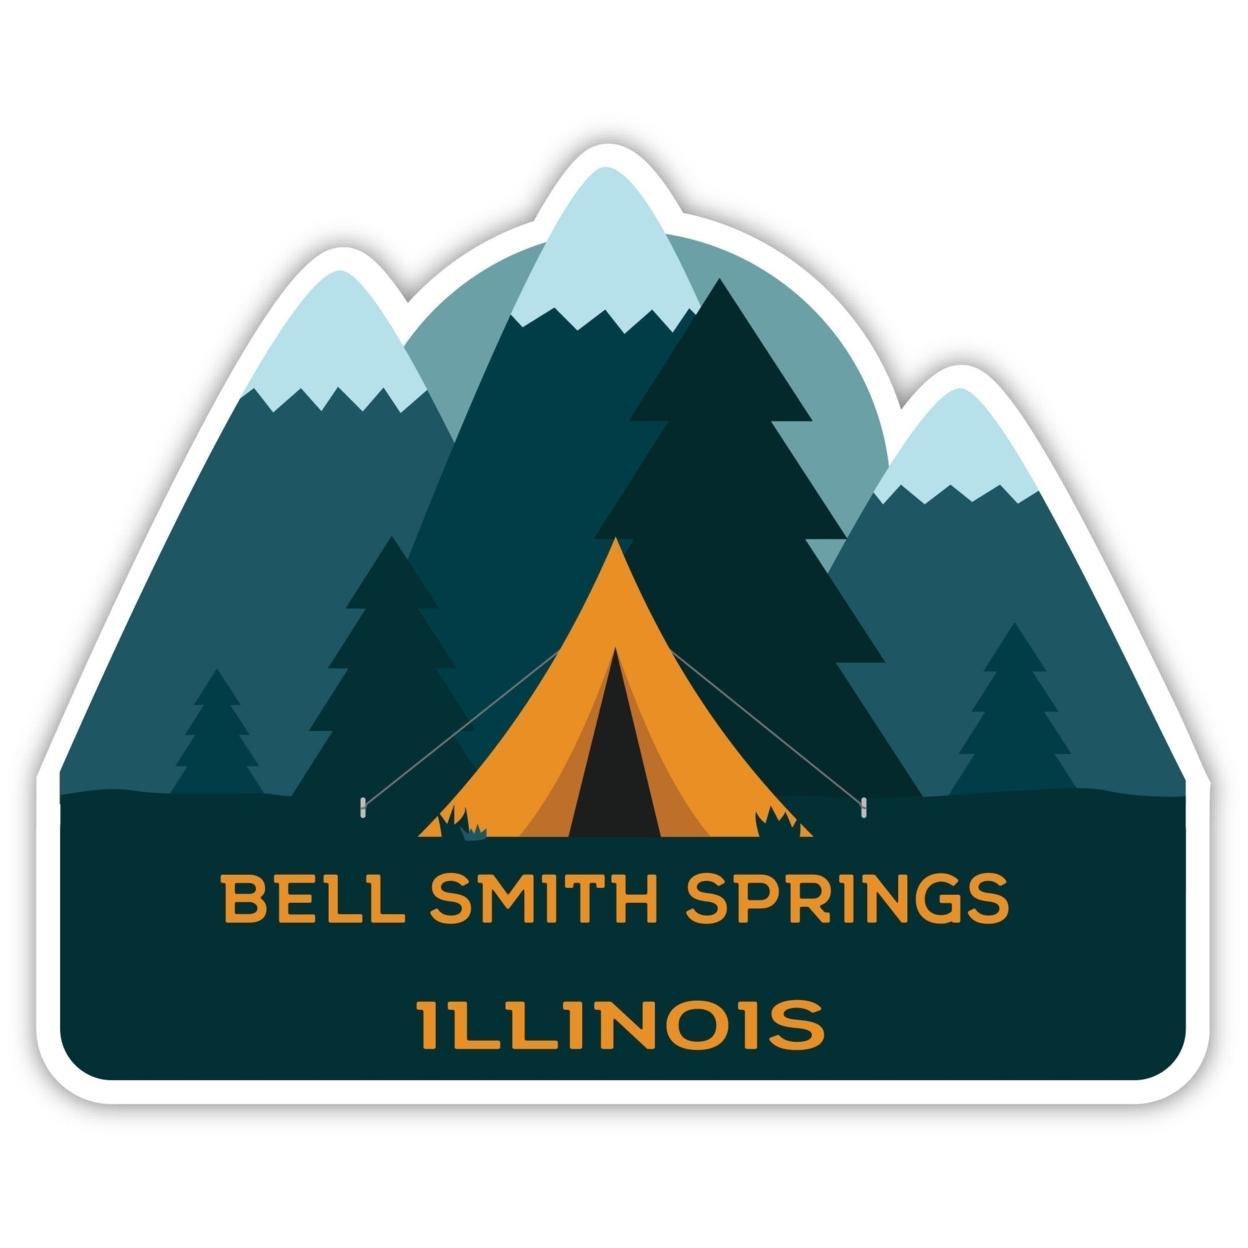 Bell Smith Springs Illinois Souvenir Decorative Stickers (Choose Theme And Size) - Single Unit, 10-Inch, Tent